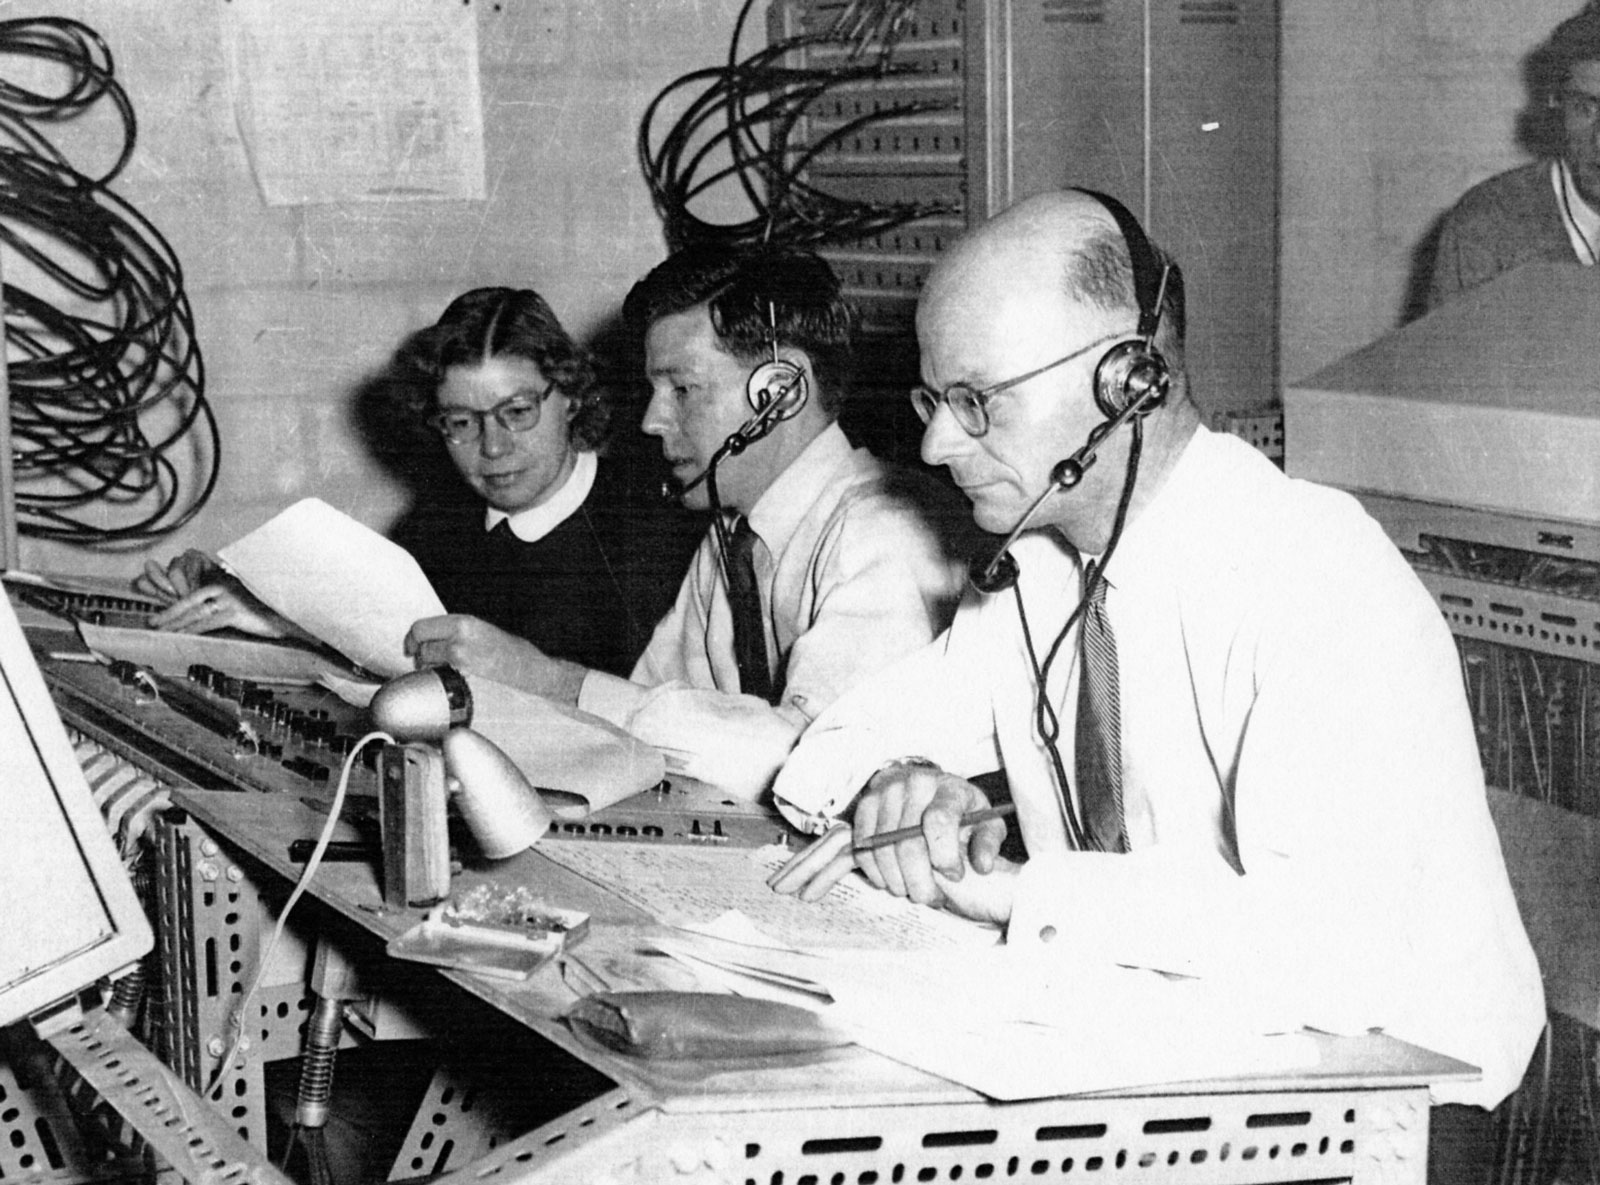 Two men and a woman sit behind a control desk in a black and white photo. There are lots of wires around them. The men wear headsets with headphones.